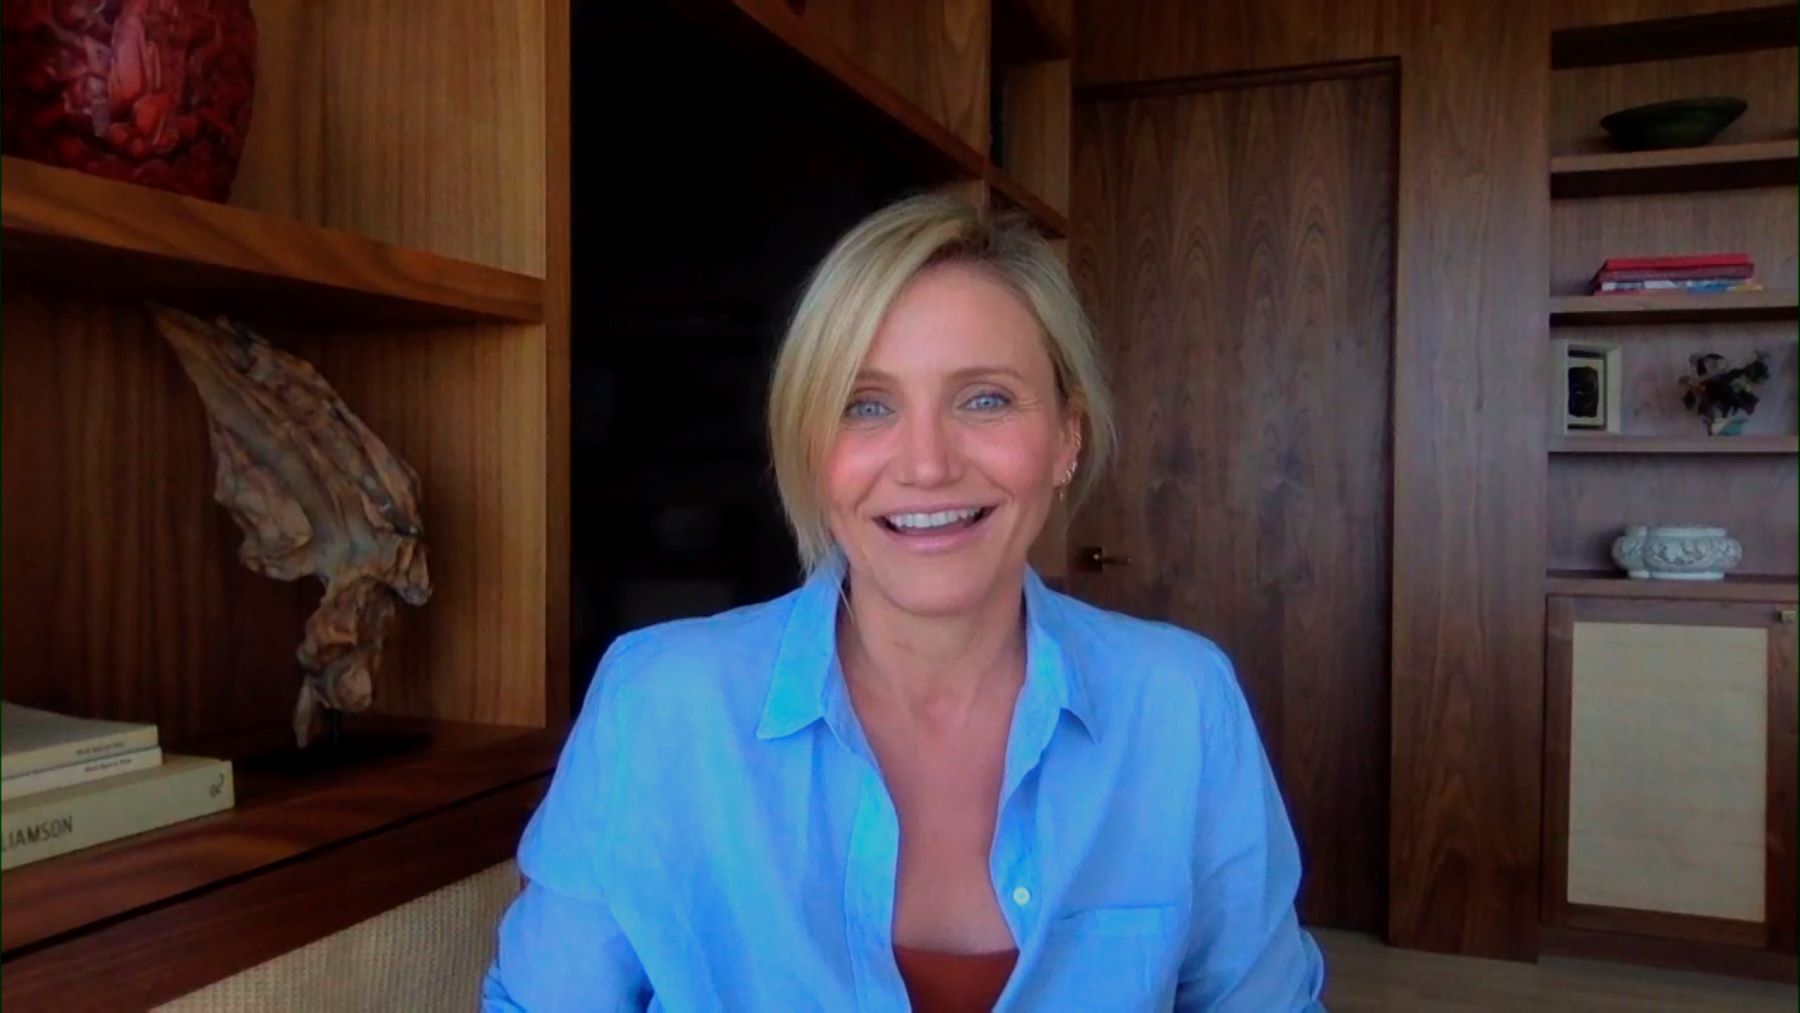 Cameron Diaz Describes Her Life as ‘Completely Different’ Since She Quit Acting